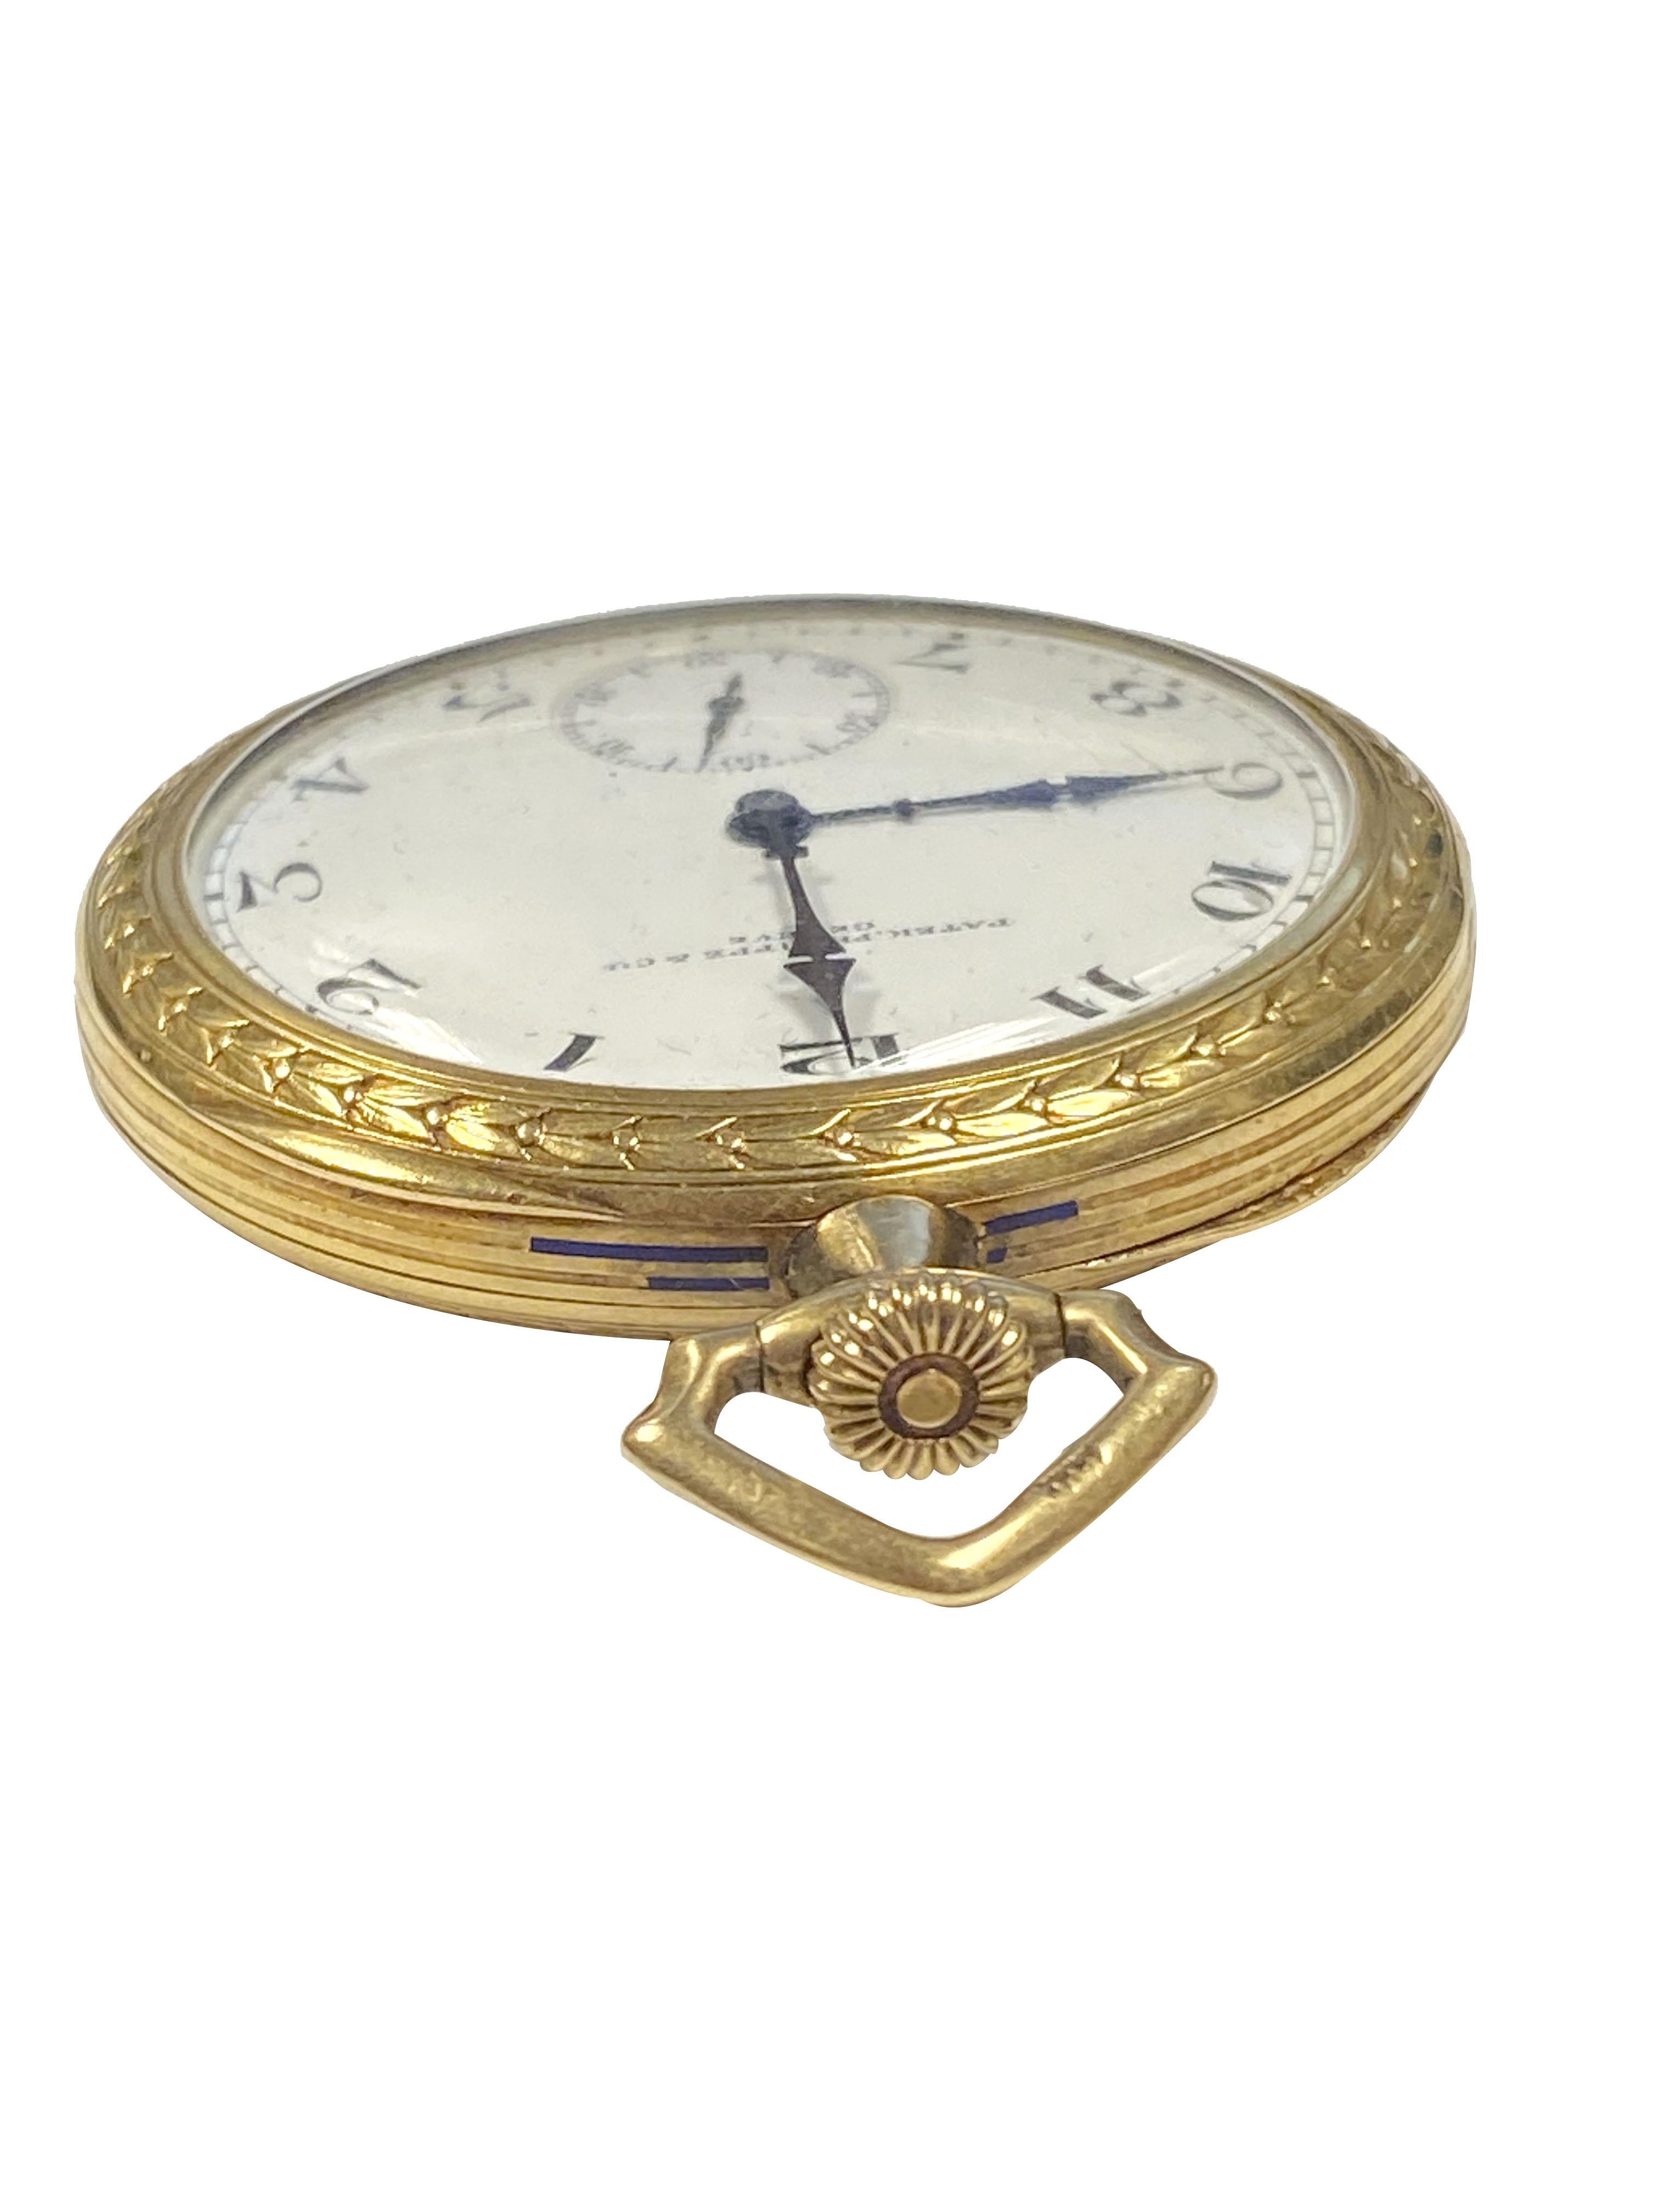 Circa 1920s Patek Philippe Pocket watch,  45 M.M. 3 Piece 18k Yellow Gold case with Gold inside Cuvette, ( dust cover ) Hand Engraving, Chasing on the Bezel and case back. 18 Jewel Mechanical Manual wind Nickle Lever movement. Porcelain dial with